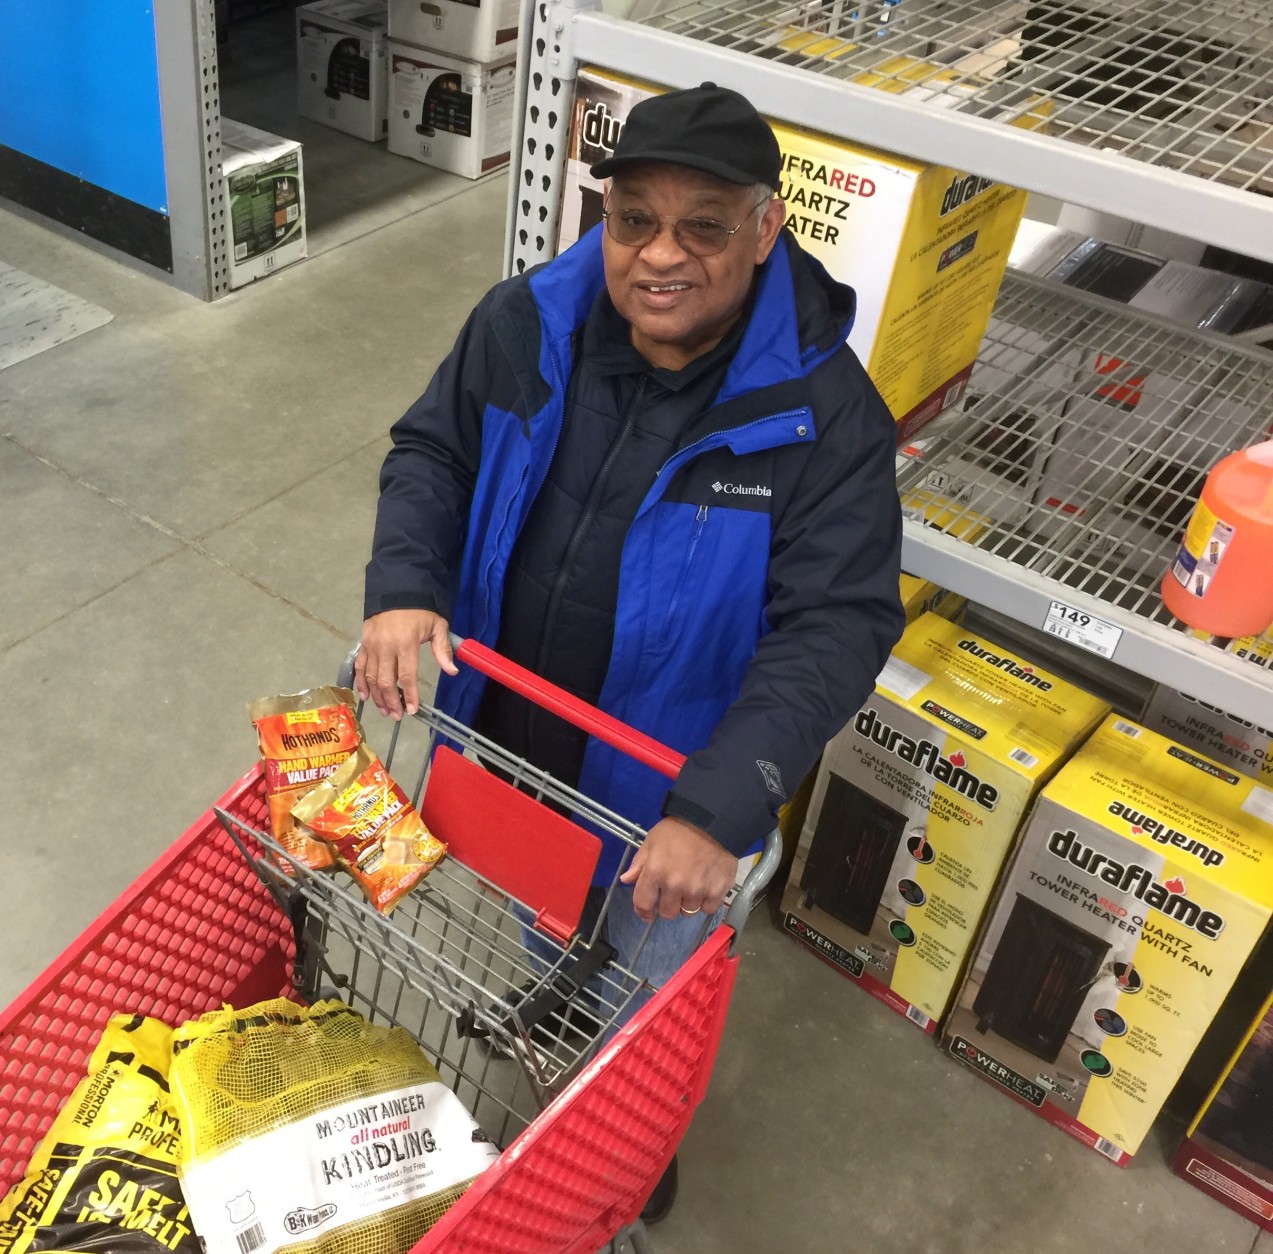 Greg King of Temple Hills, Md. doesn't like popsicle toes. He says toe warmers he's buying are more important to him than the hand warmers. 